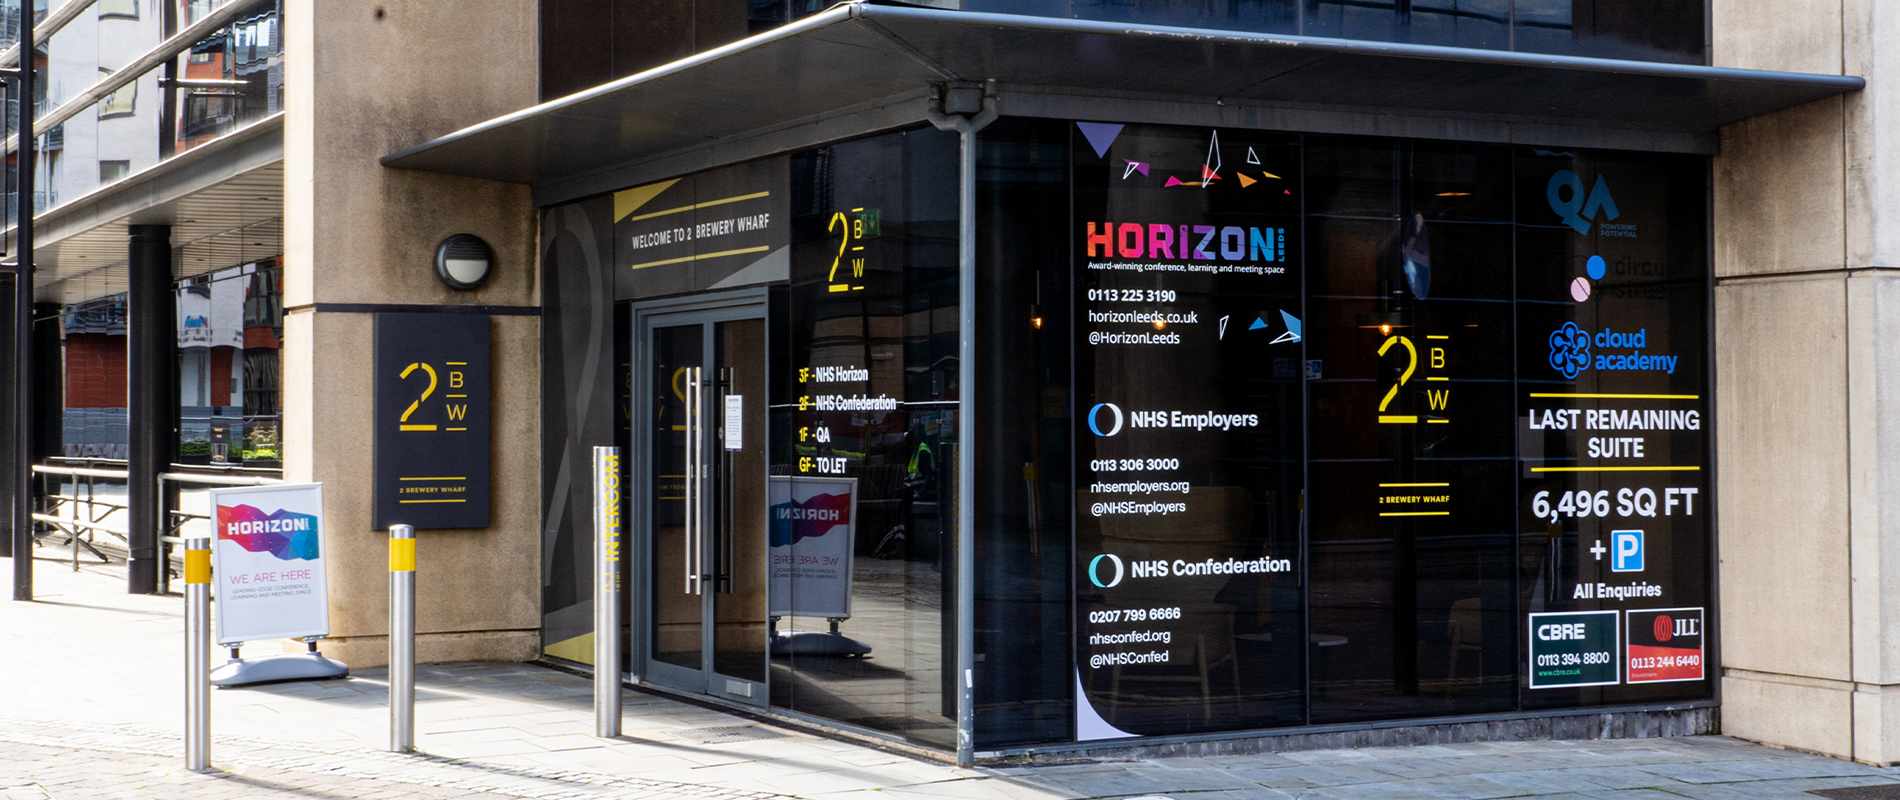 Horizon Accessibility - Front of building